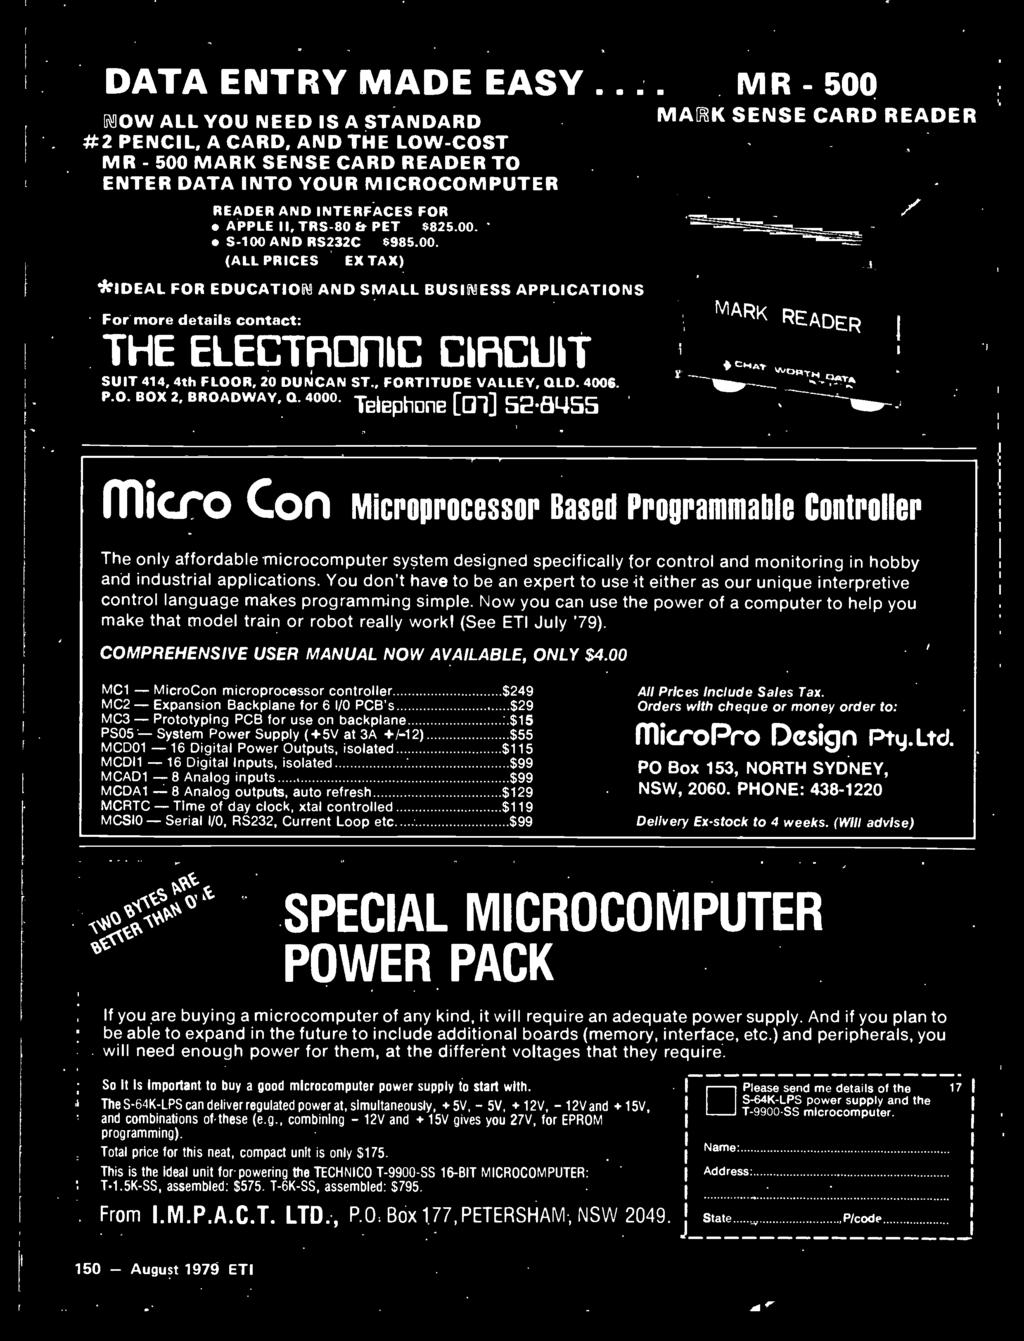 8155 MARK SENSE CARD READER MARK READER fuco Con Microprocessor Based Programmable Controller The only affordable microcomputer system designed specifically for control and monitoring in hobby and